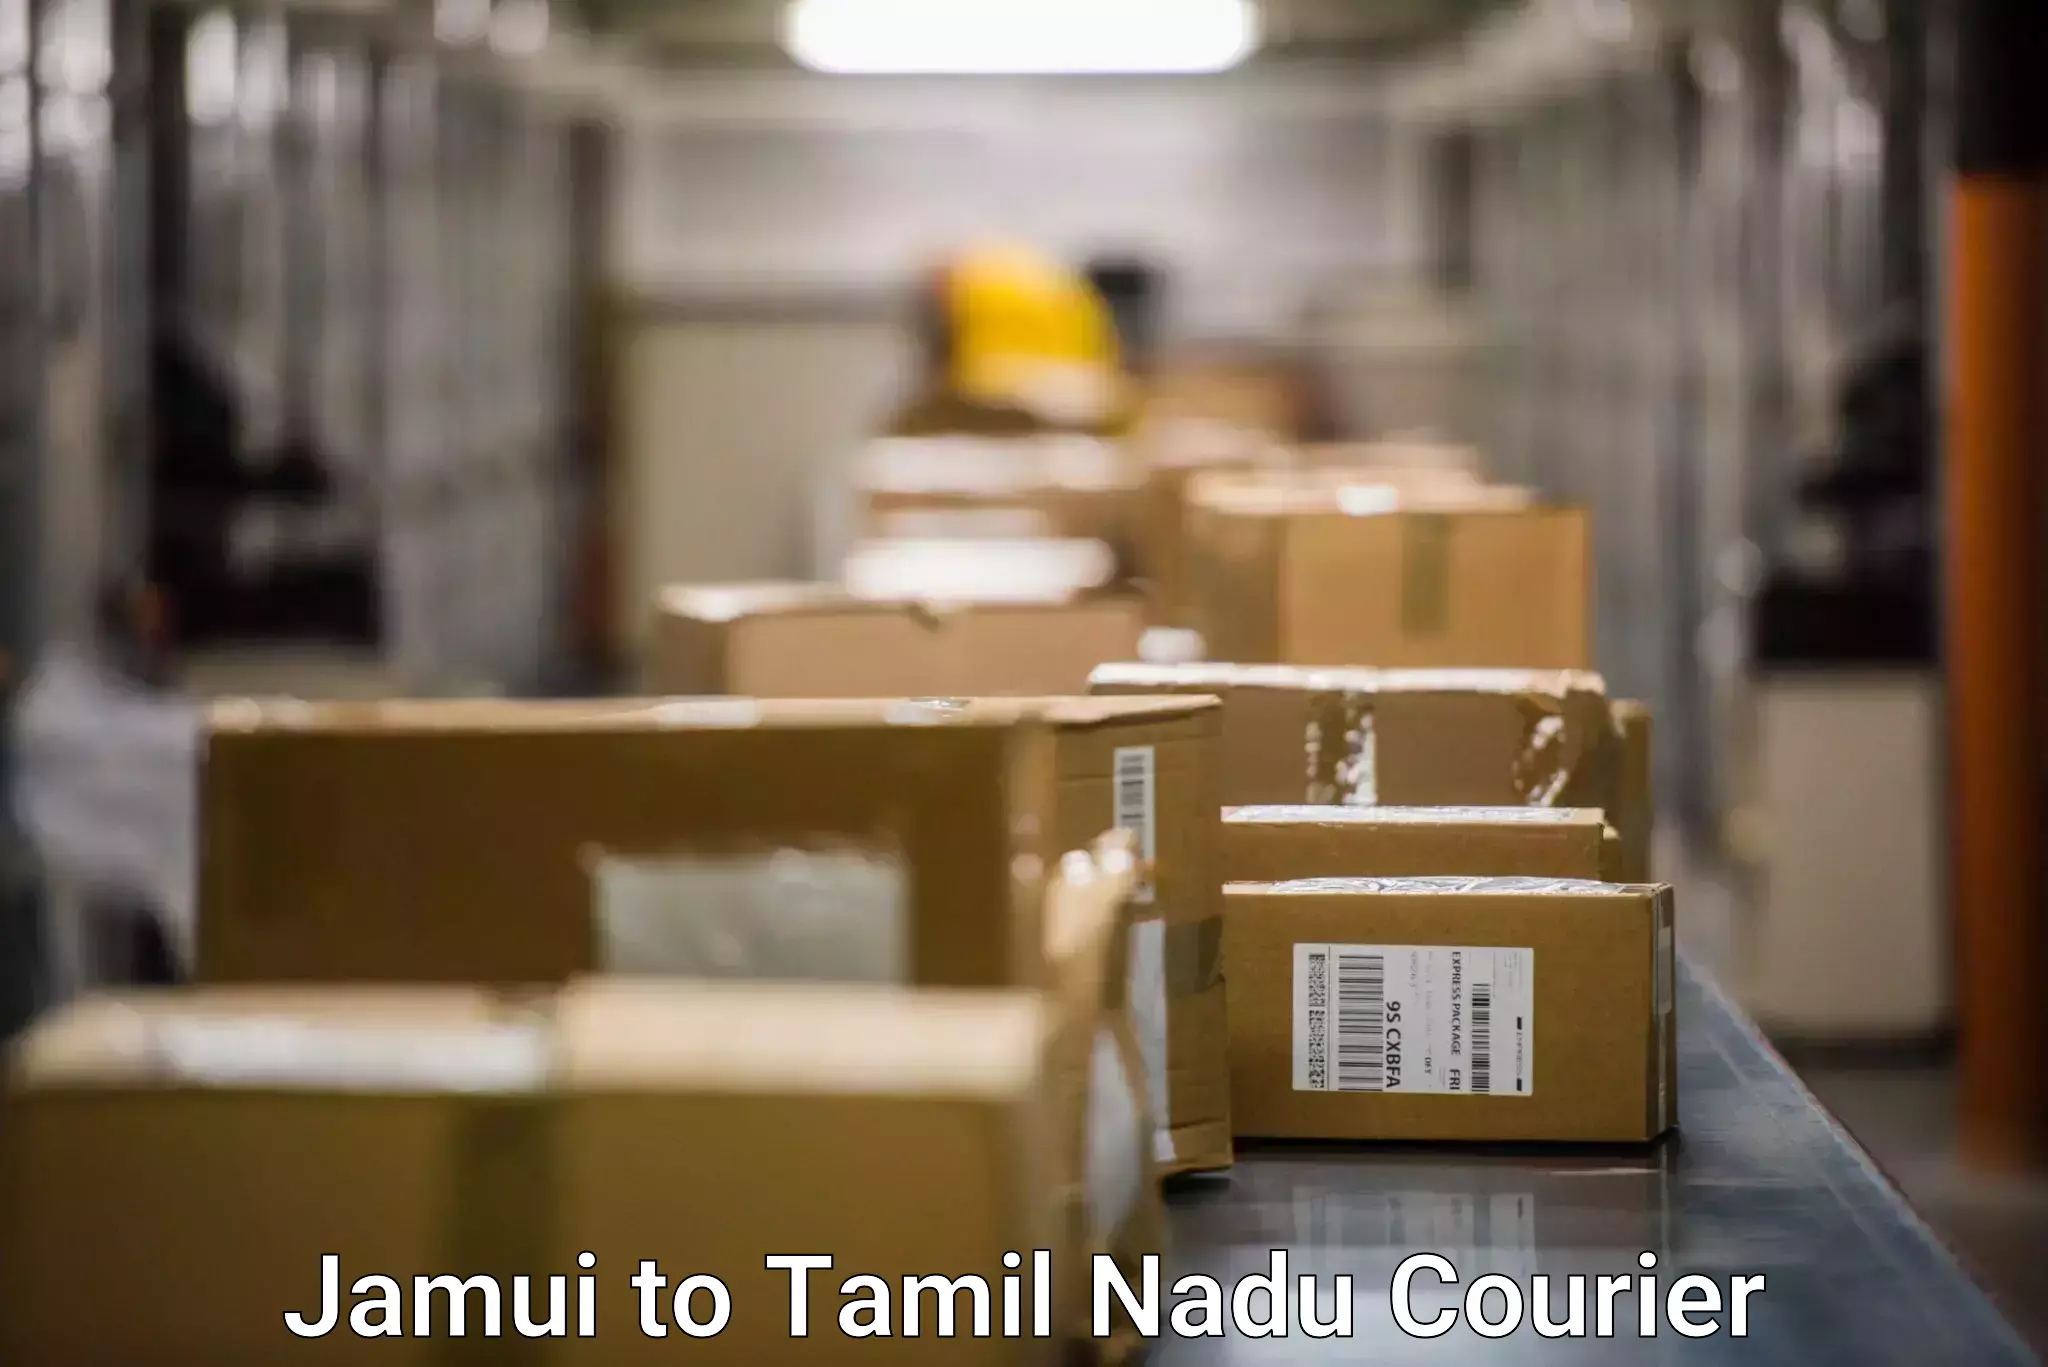 Express delivery capabilities Jamui to Ennore Port Chennai